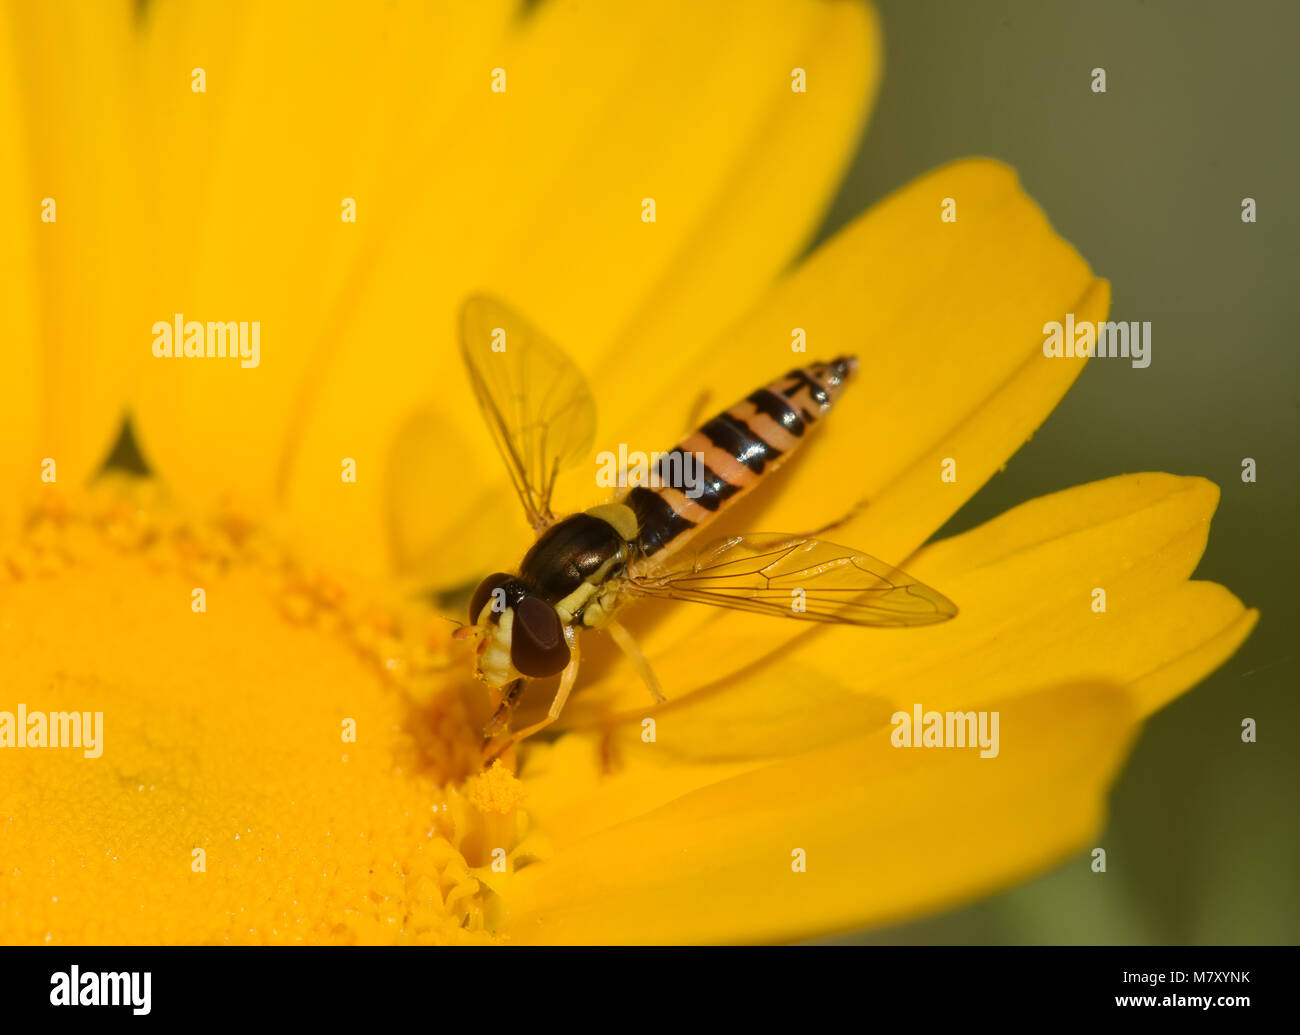 Hoverfly on flower Stock Photo